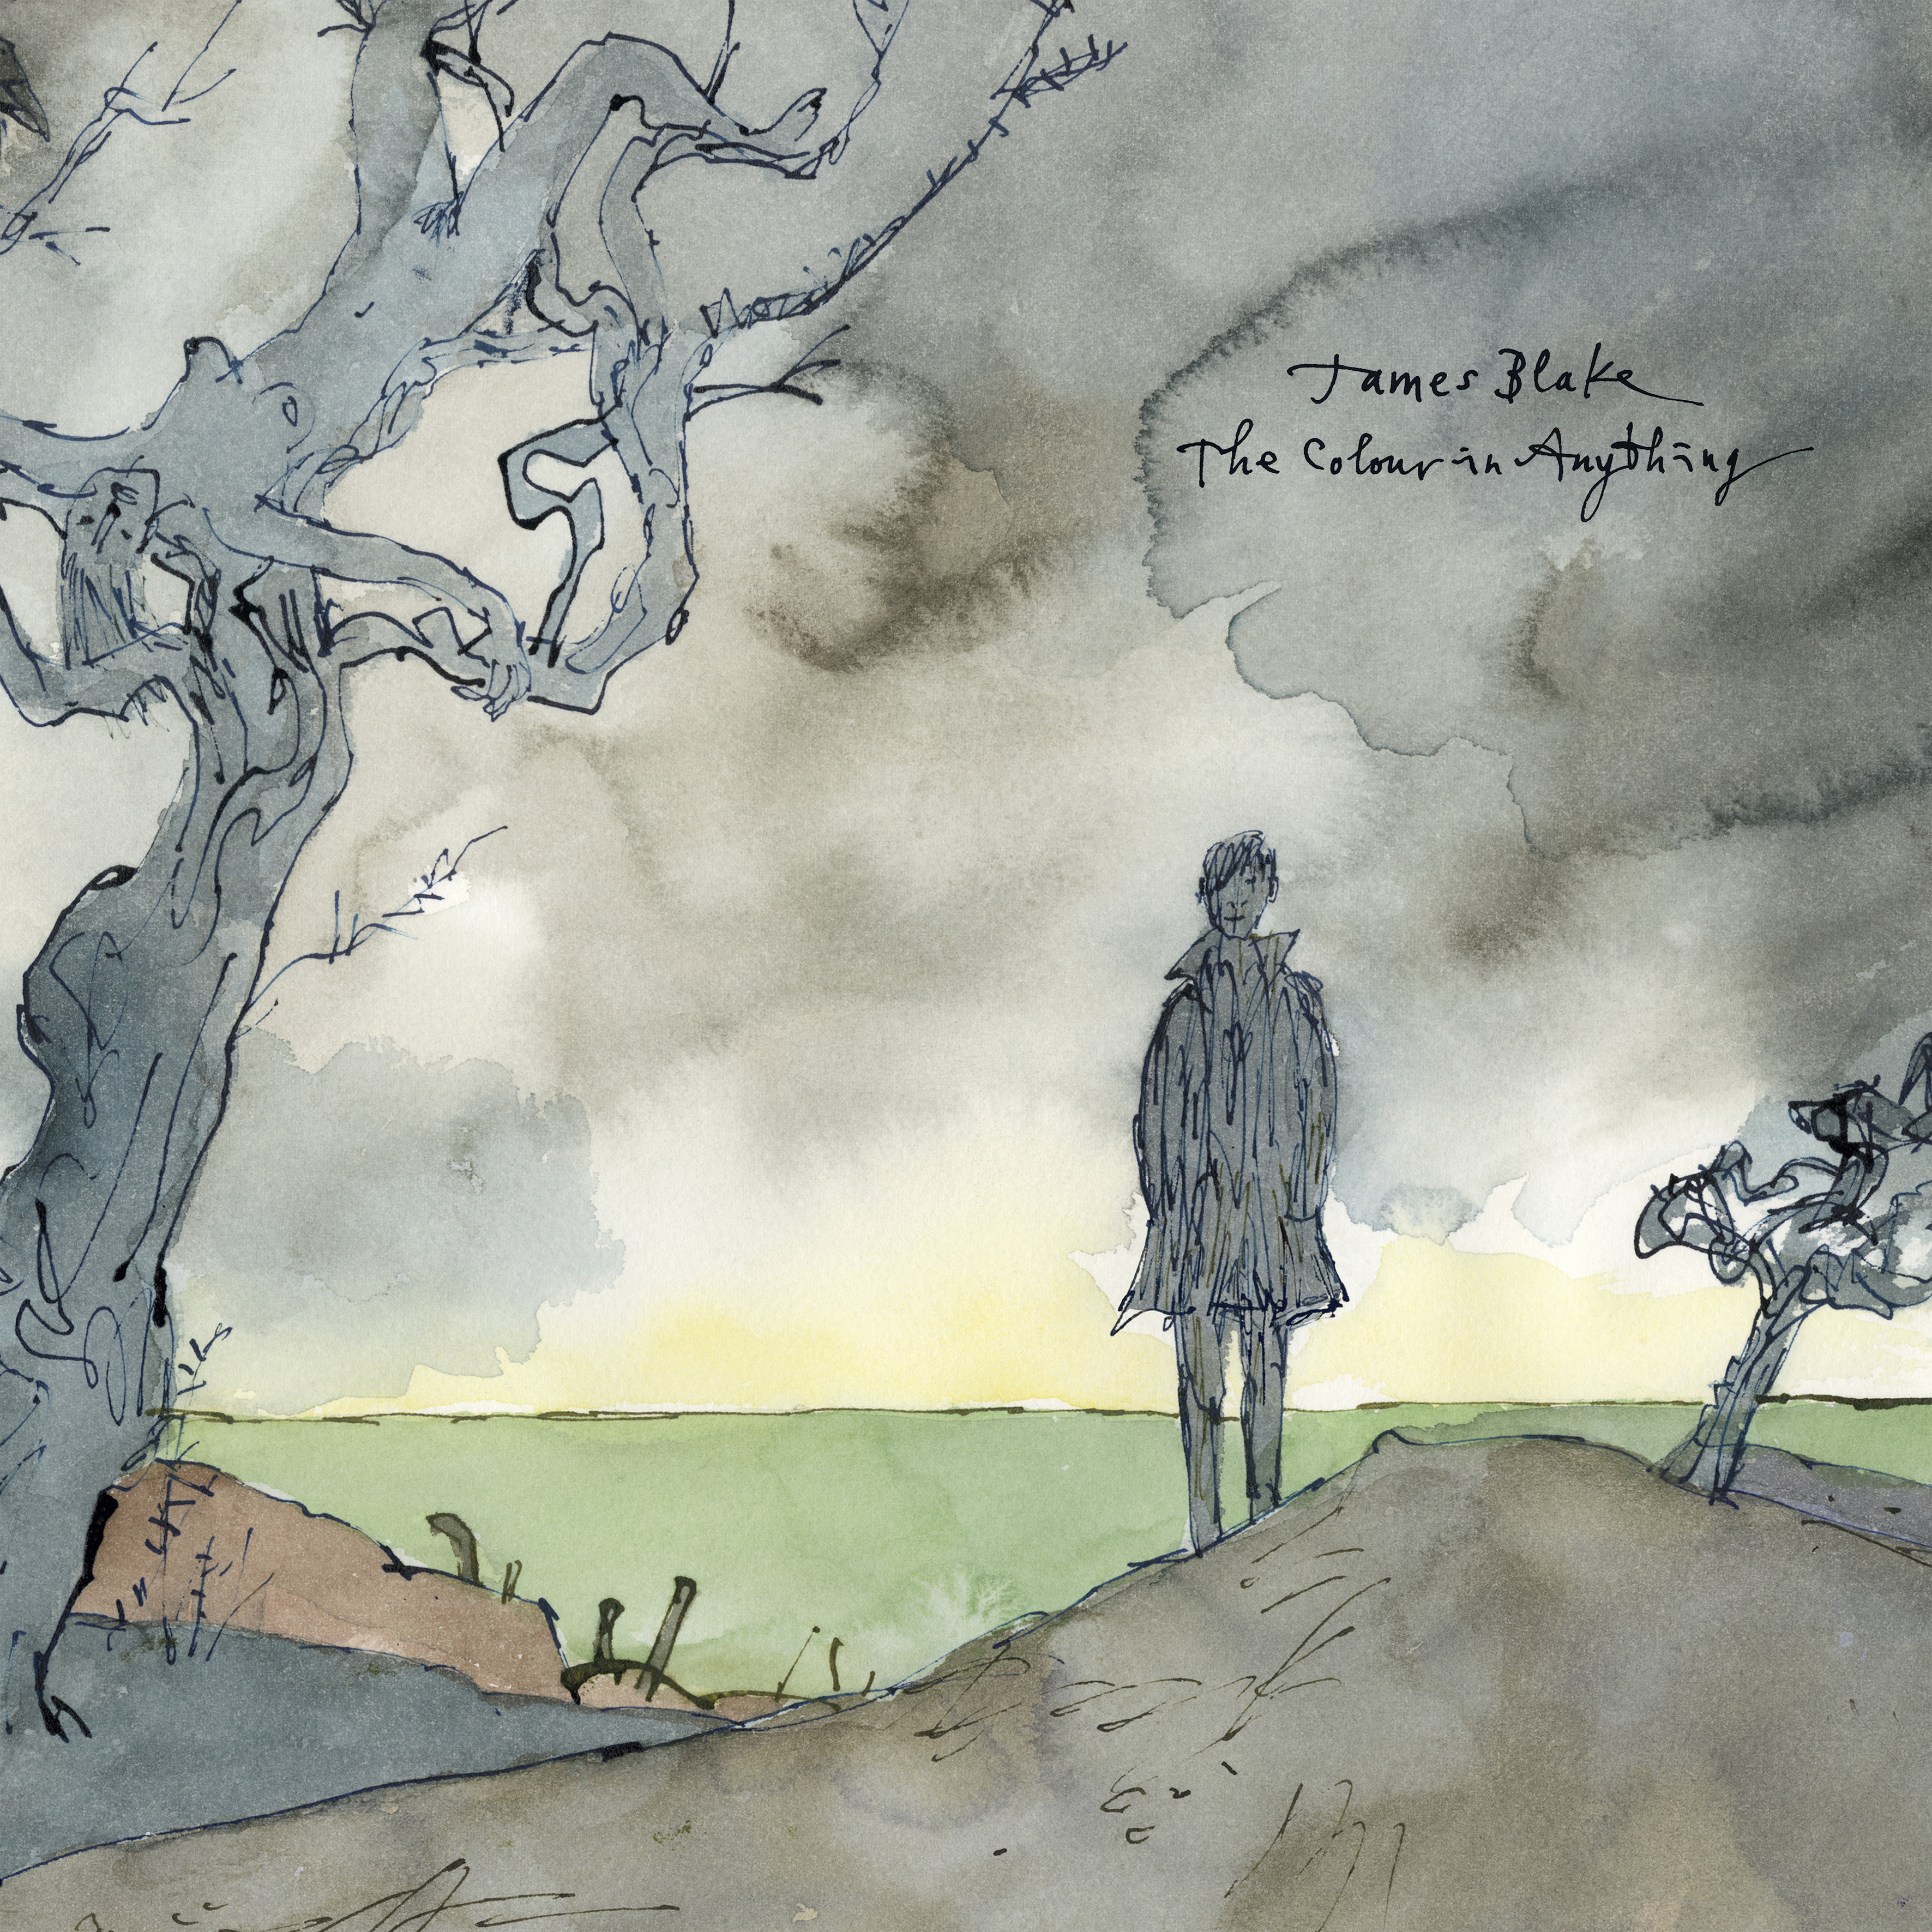 James Blake debuts new video for his single "I Need A Forest Fire".